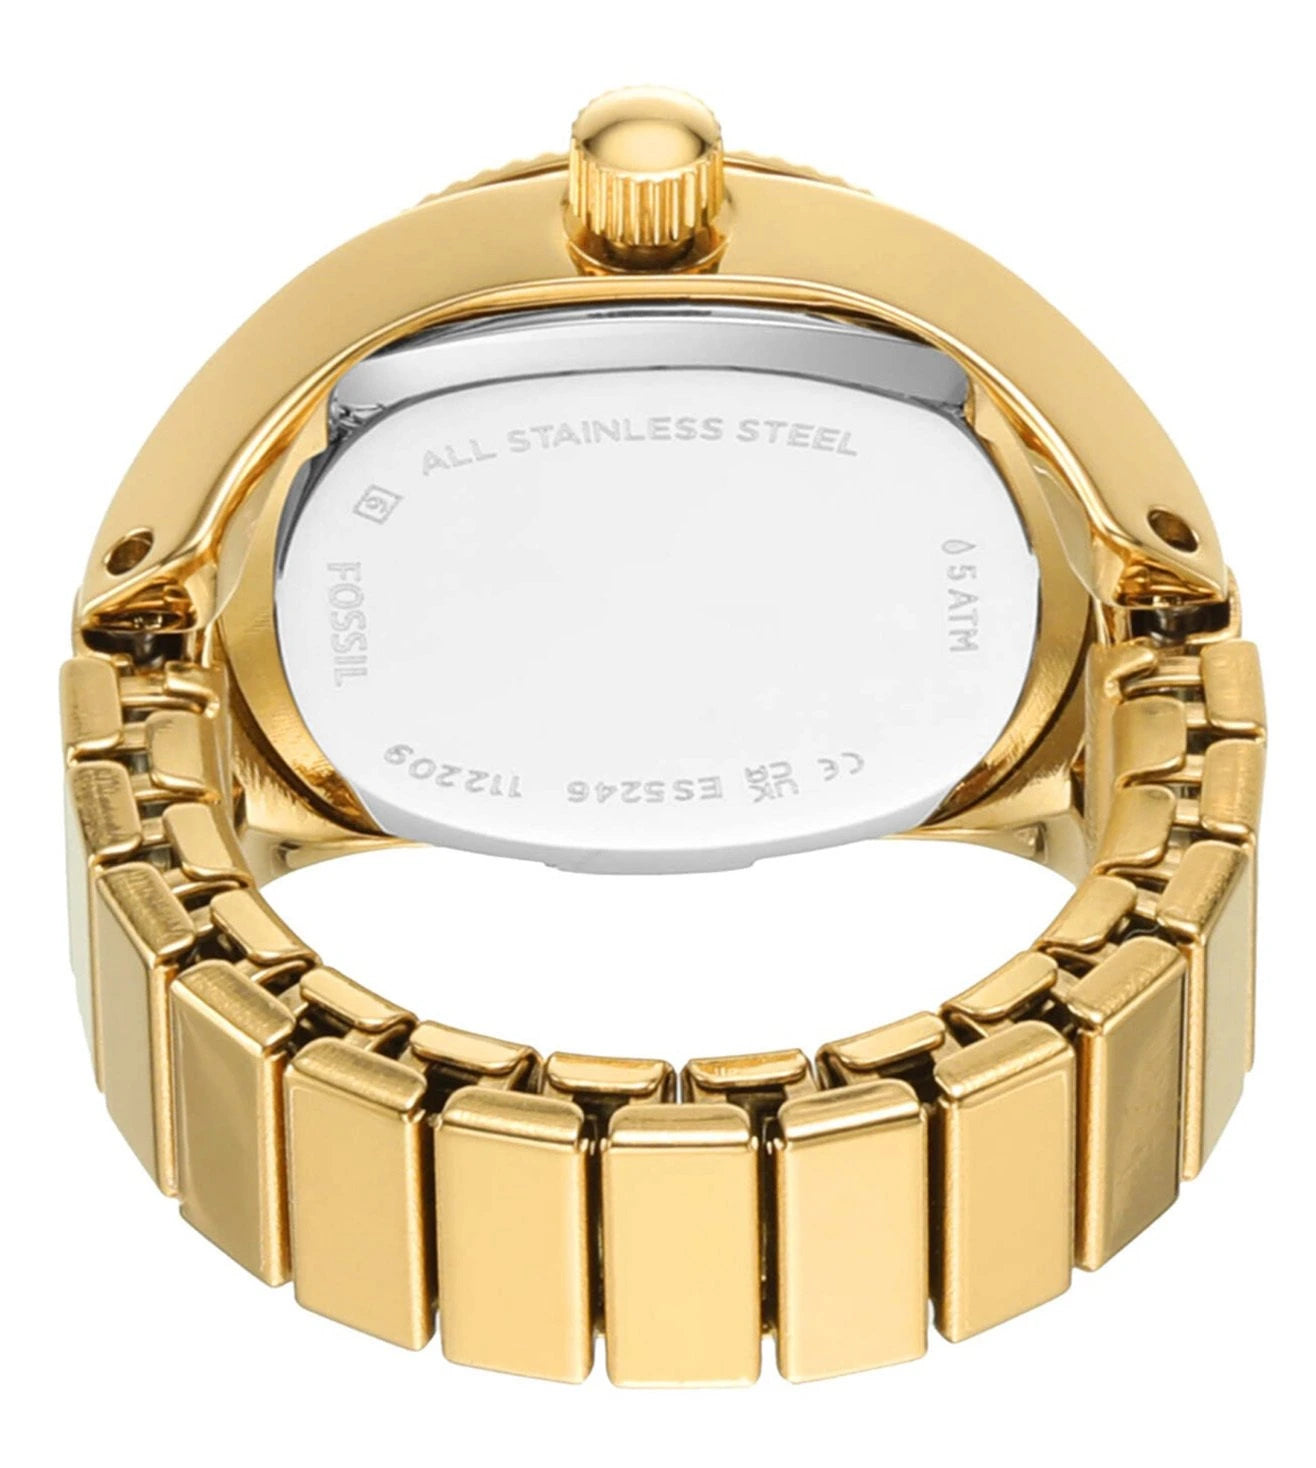 ES5246 | FOSSIL Ring Analog Watch for Women